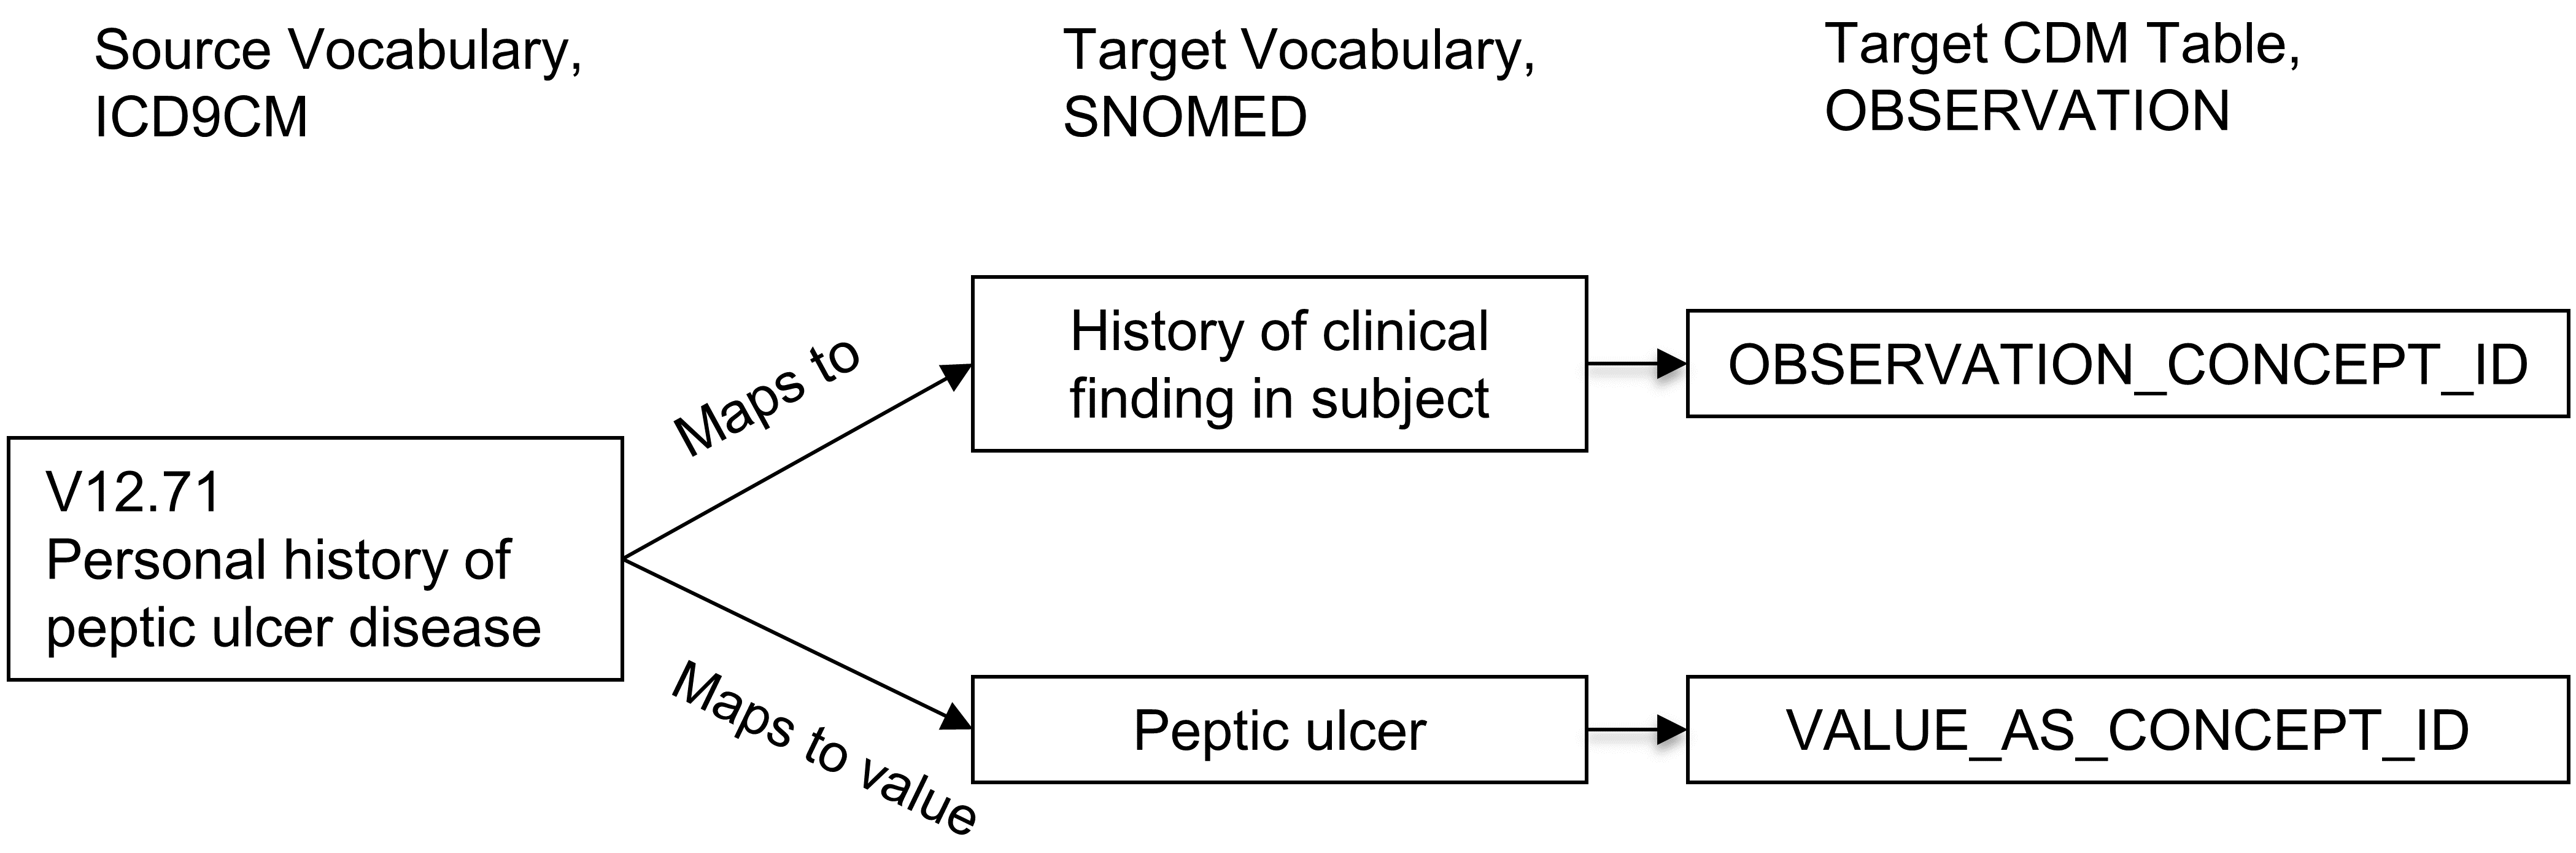 One-to-many mapping between source concept and Standard Concepts. A pre-coordinated concept is split into two concepts, one of which is the attribute (here history of clinical finding) and the other one is the value (peptic ulcer). While "Maps to" relationship will map to concepts of the measurement or observation domains, the ‘Maps to value" concepts have no domain restriction.